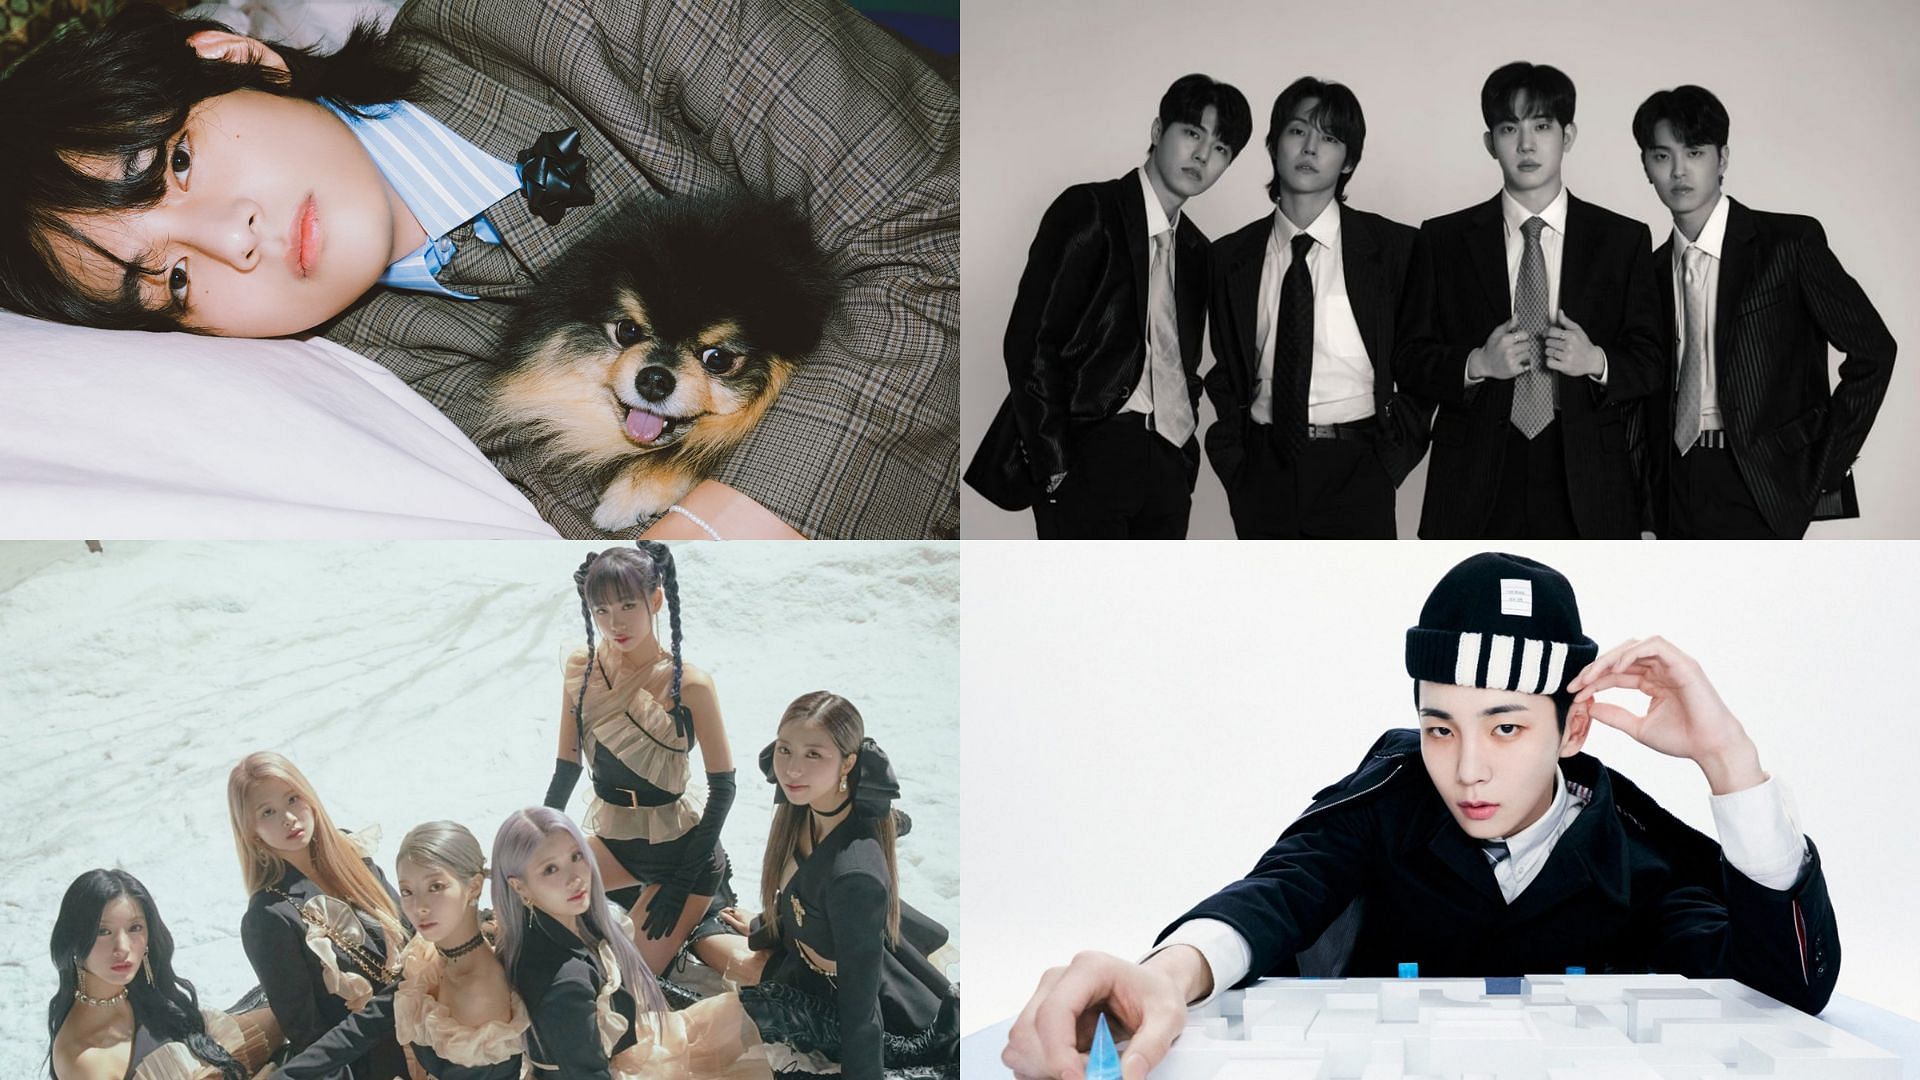 There are many K-pop comebacks in September 2023 that fans are looking forward to. (Images via BIGHIT MUSIC, Windfall, RBW Entertainment, and SM Entertainment)